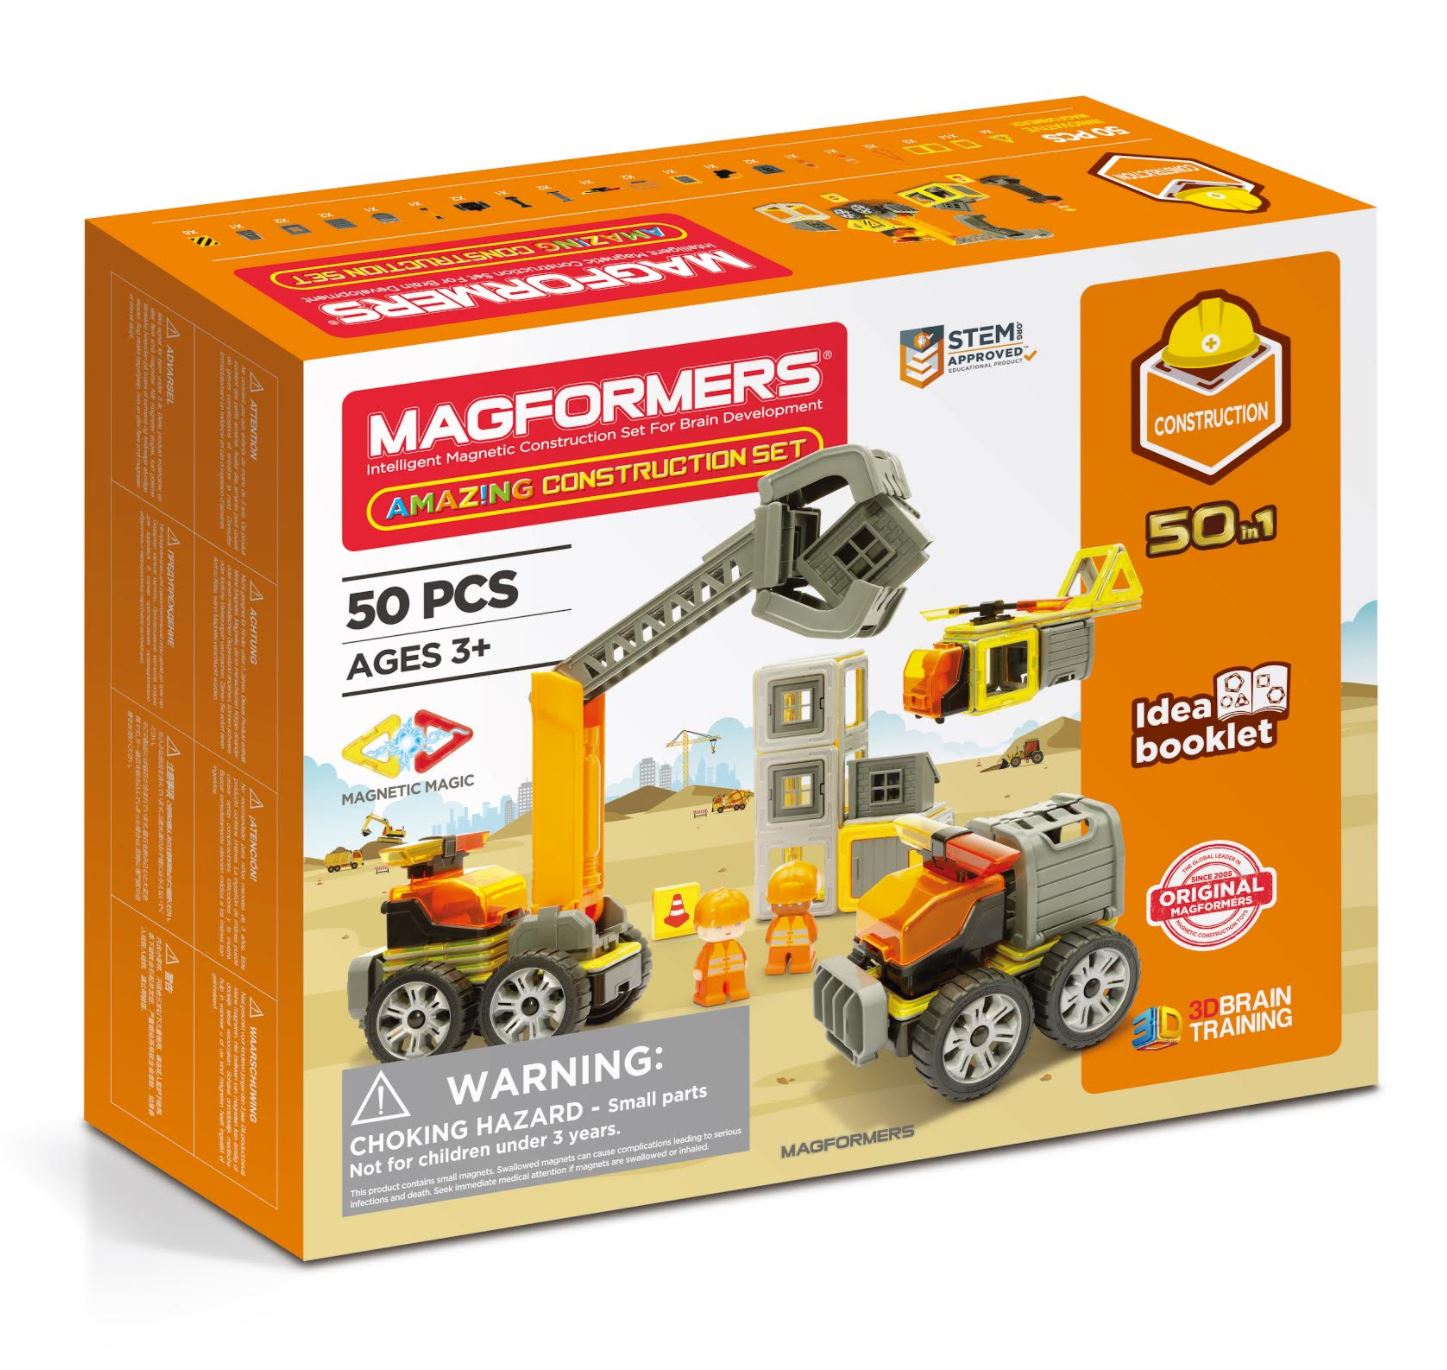 Magformers Amazing Construction 50 Pieces, Wheels, Orange colors, Magnetic Geometric tiles STEM Toy Ages 3+ - image 1 of 6